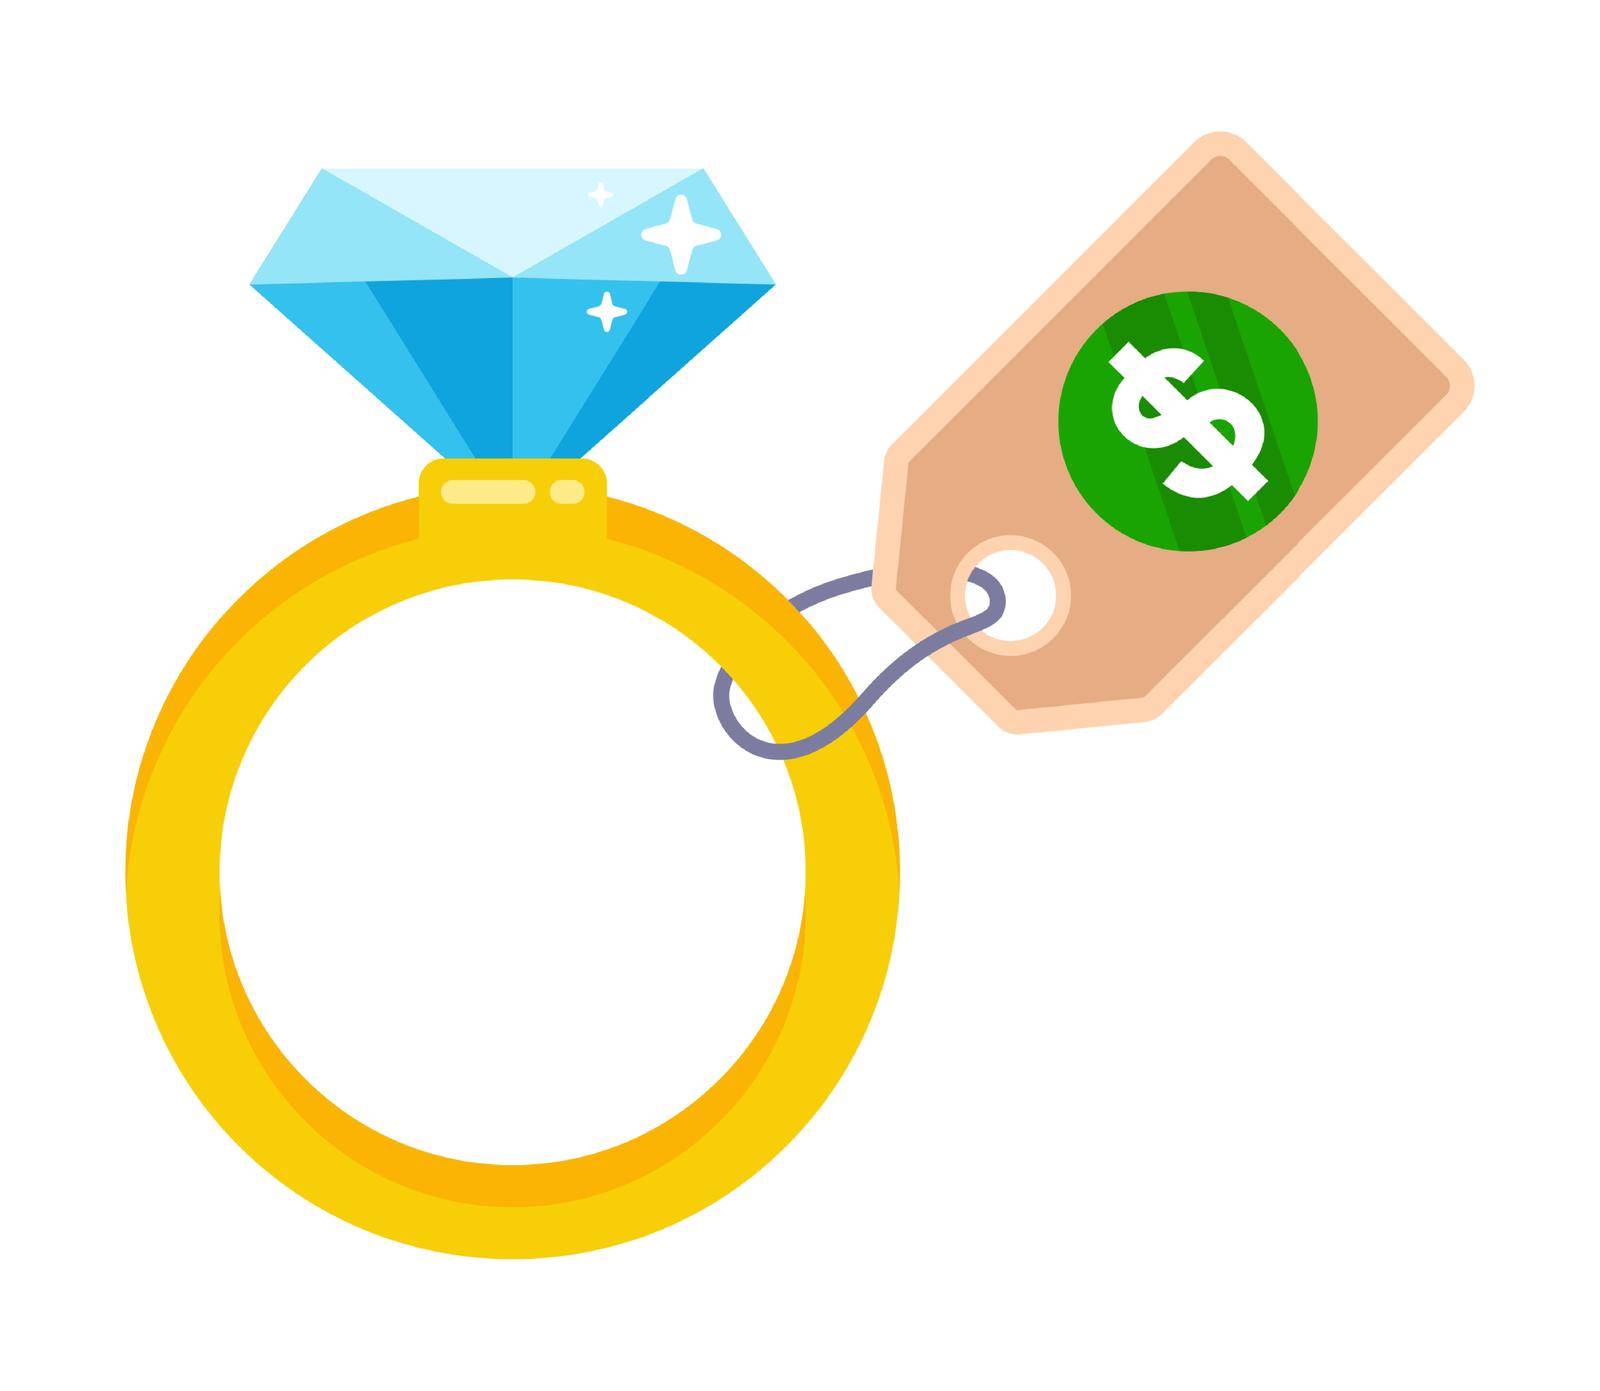 gold ring with diamond and cardboard price tag. flat vector illustration.